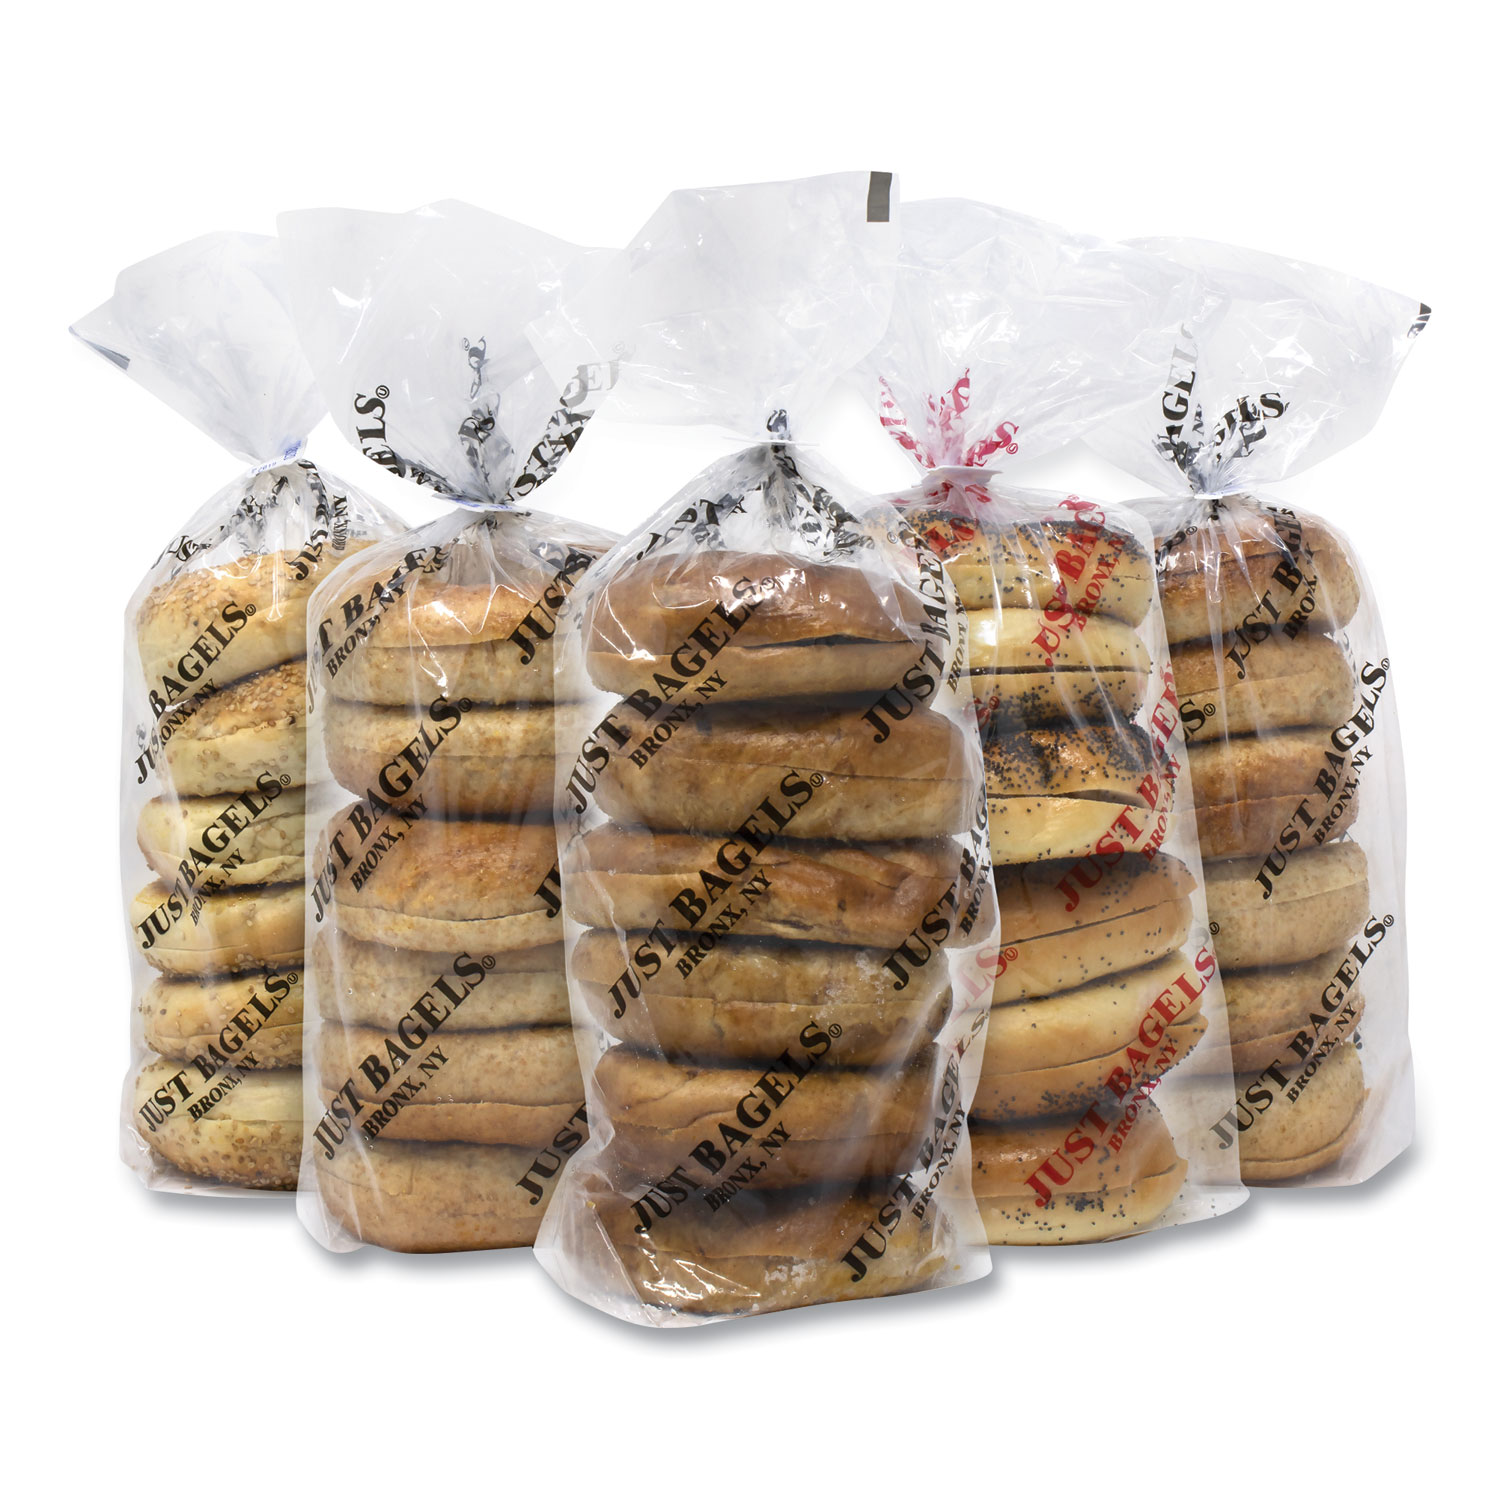  Just Bagels 348 Assorted Bagels, Assorted Flavors, 6 Bagels/Pack, 5 Packs/Carton, Free Delivery in 1-4 Business Days (GRR90300107) 